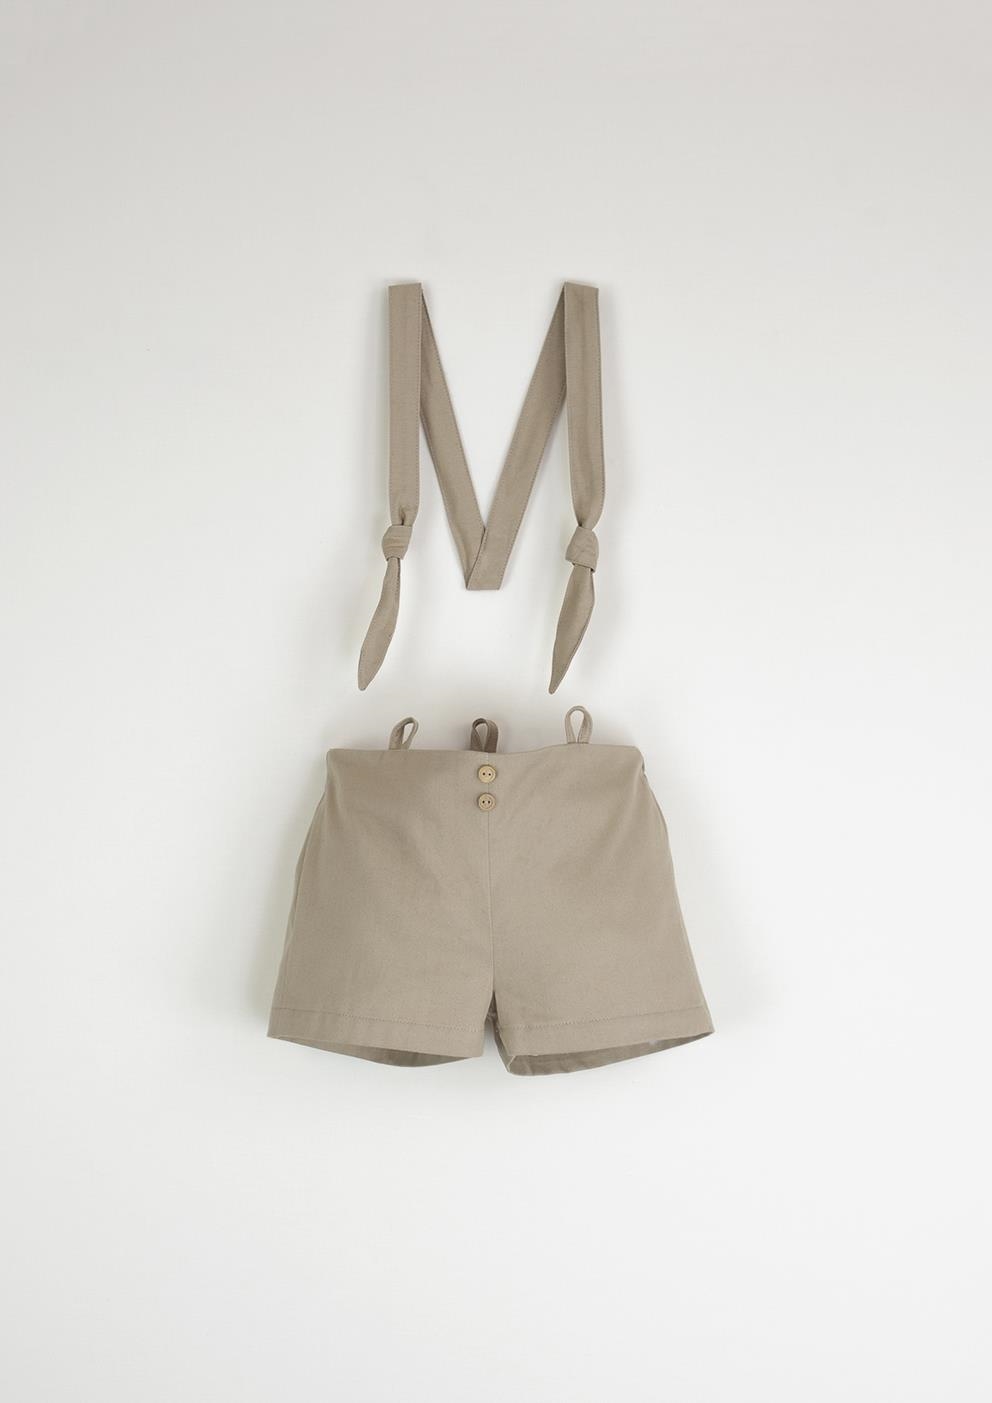 Mod.15.4 Beige dungarees with removable straps | SS23 Mod.15.4 Beige dungarees with removable straps